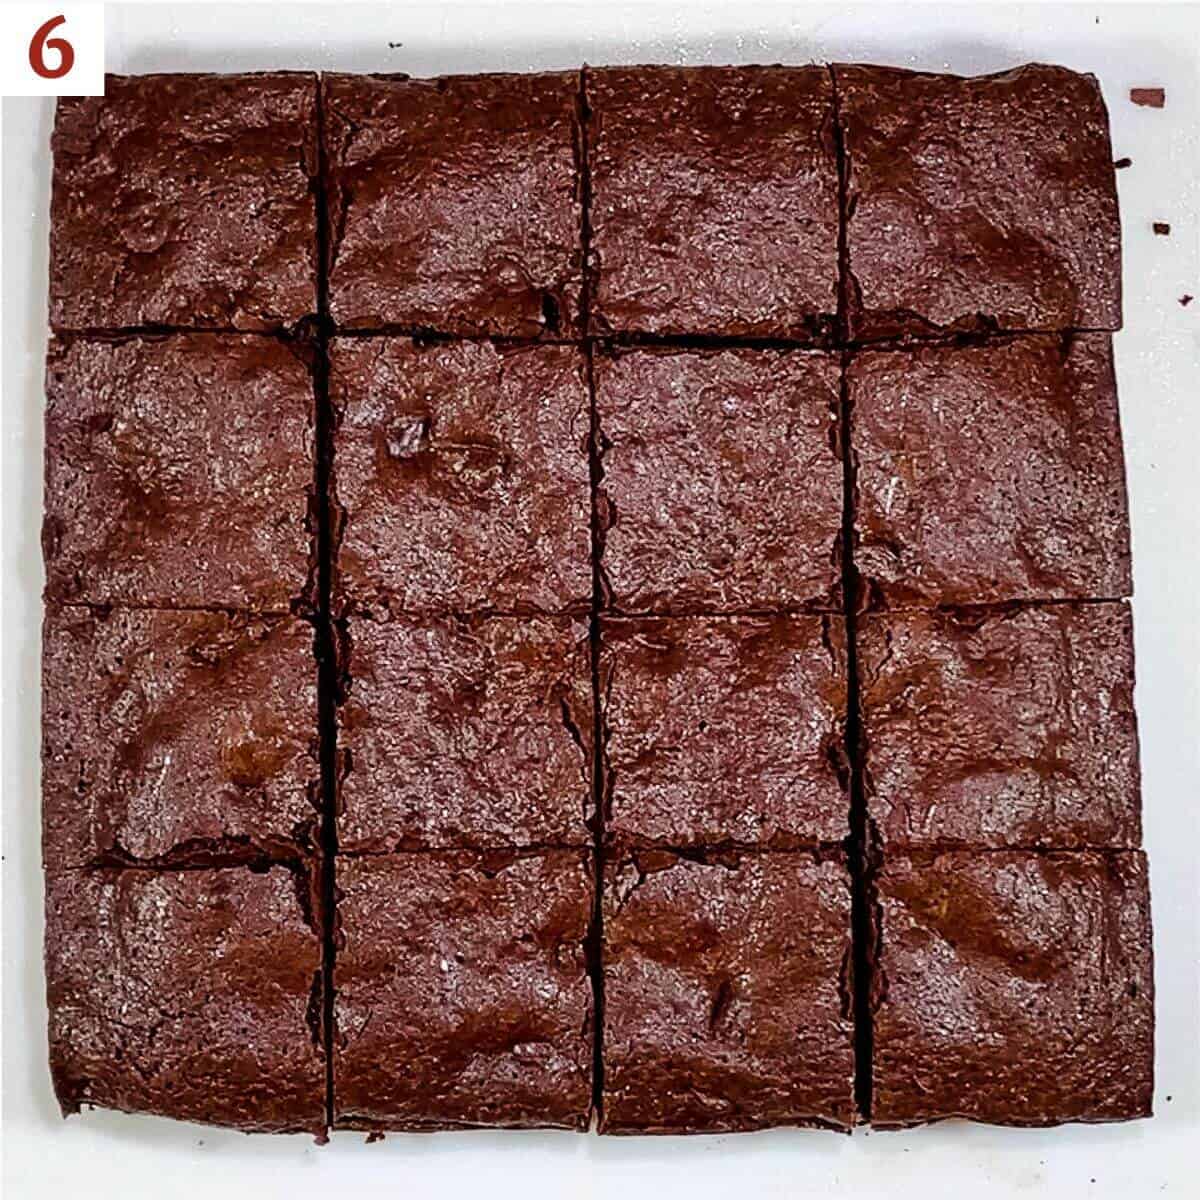 Sliced brownies on a cutting board.